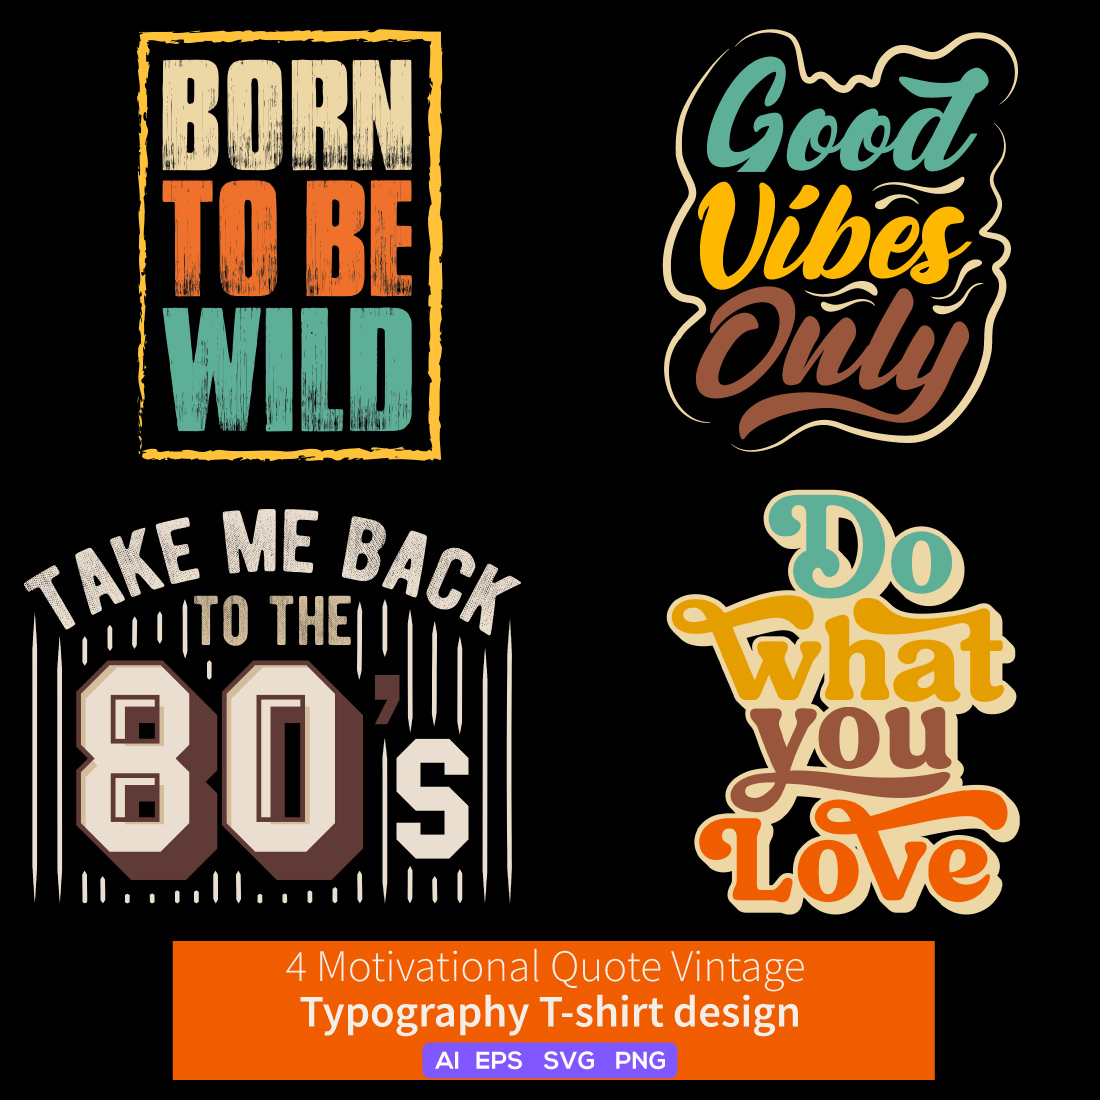 Find Your Inspiration with our Vintage Typography T-Shirt Bundle - Featuring Motivational Quotes and Retro Style preview image.